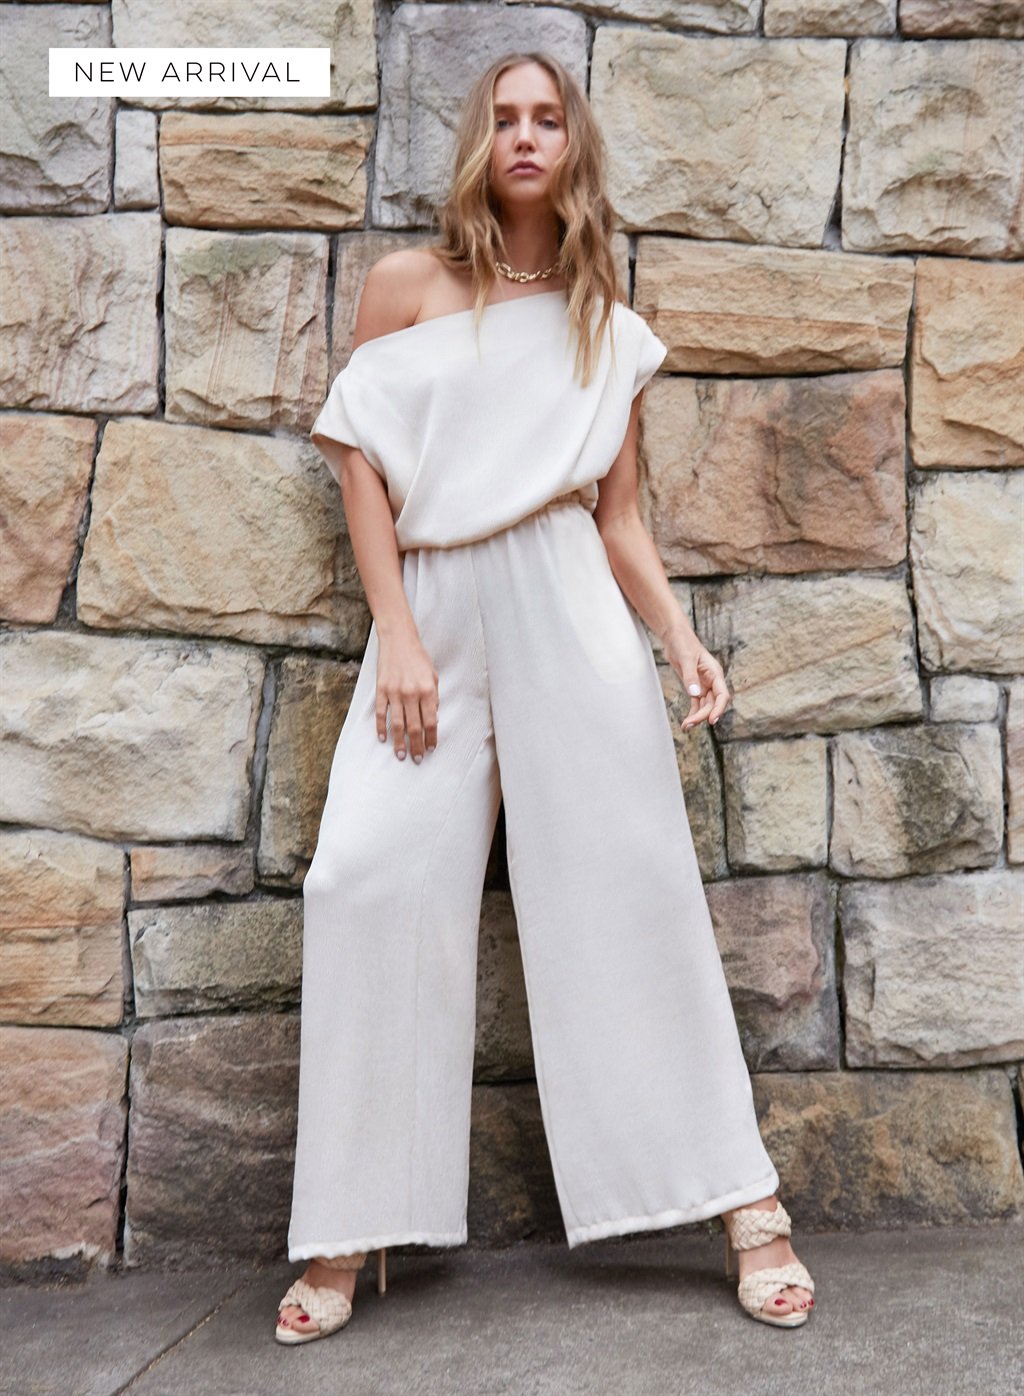 Drifter Pants by Wish the Label